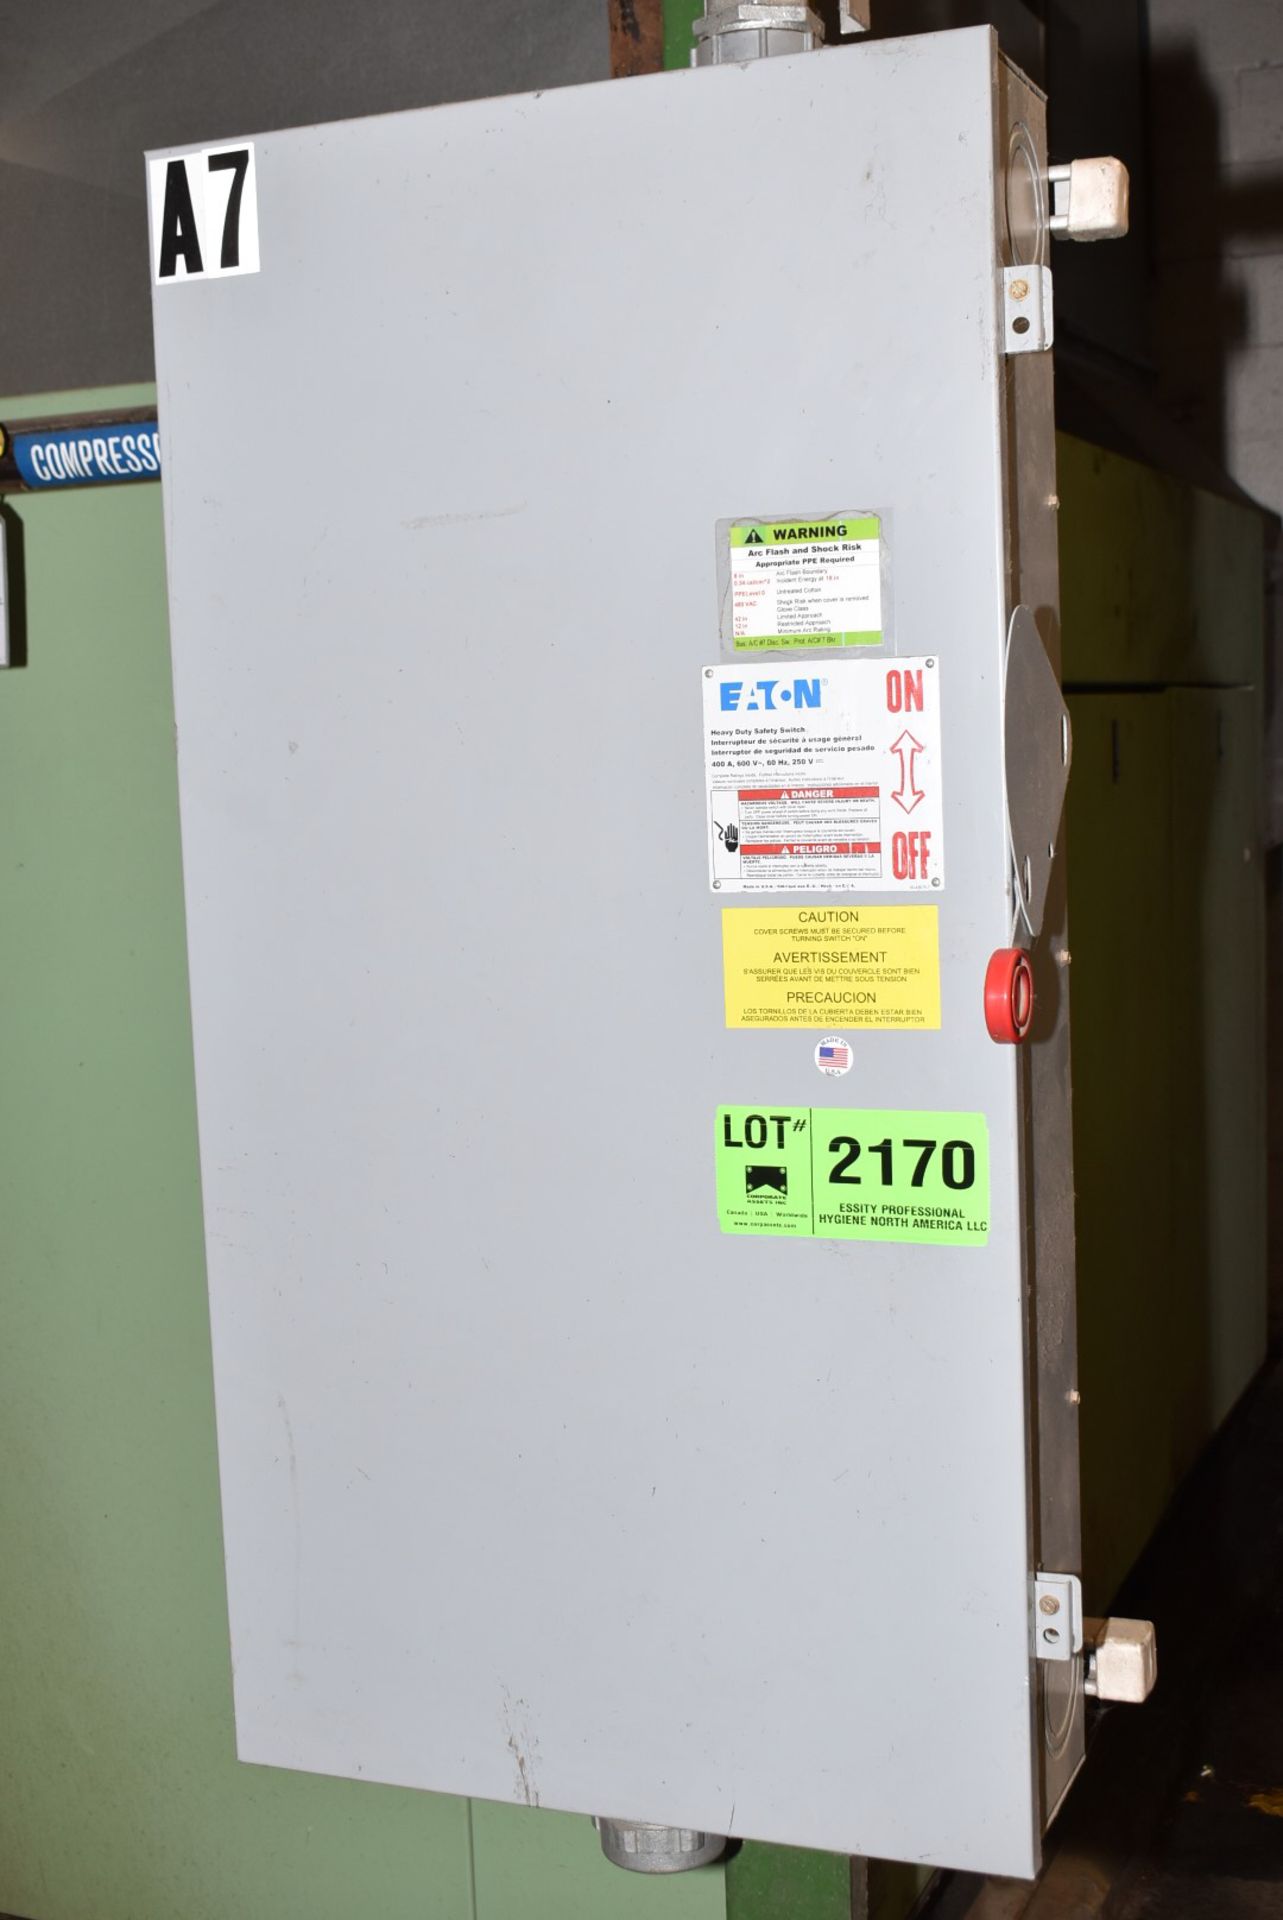 EATON HEAVY DUTY SAFETY SWITCH 400A, 600V, 60 HZ (CI) (DELAYED DELIVERY) [RIGGING FEES FOR LOT #2170